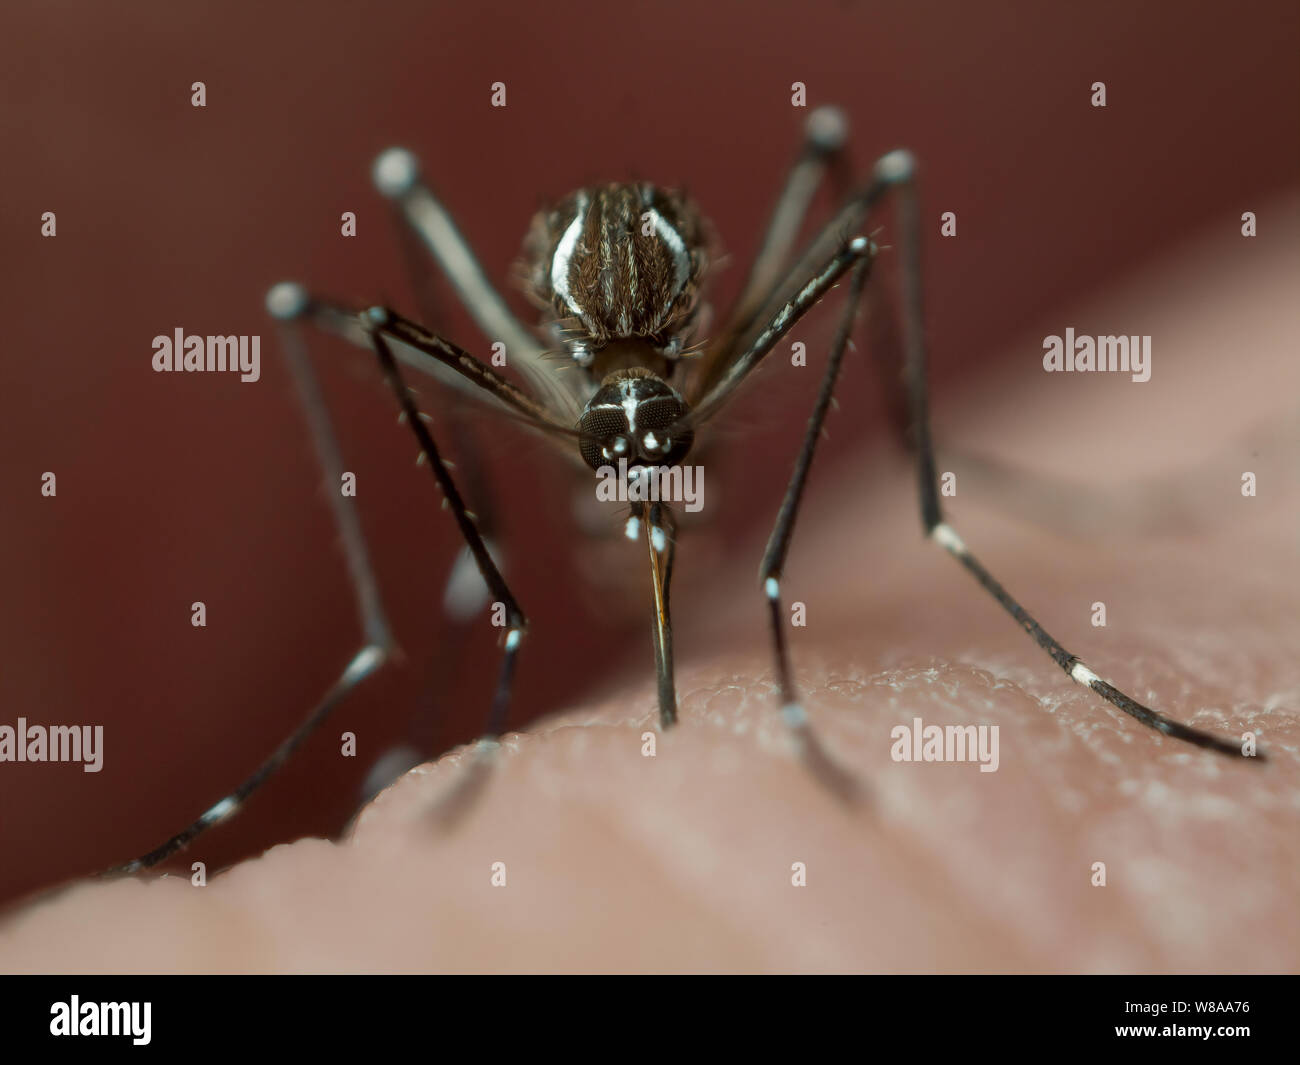 Aedes aegypti (yellow fever mosquito) biting human skin, mosquito known to spread tropical diseases such as zika, dengue, yellow fever and chikungunya Stock Photo